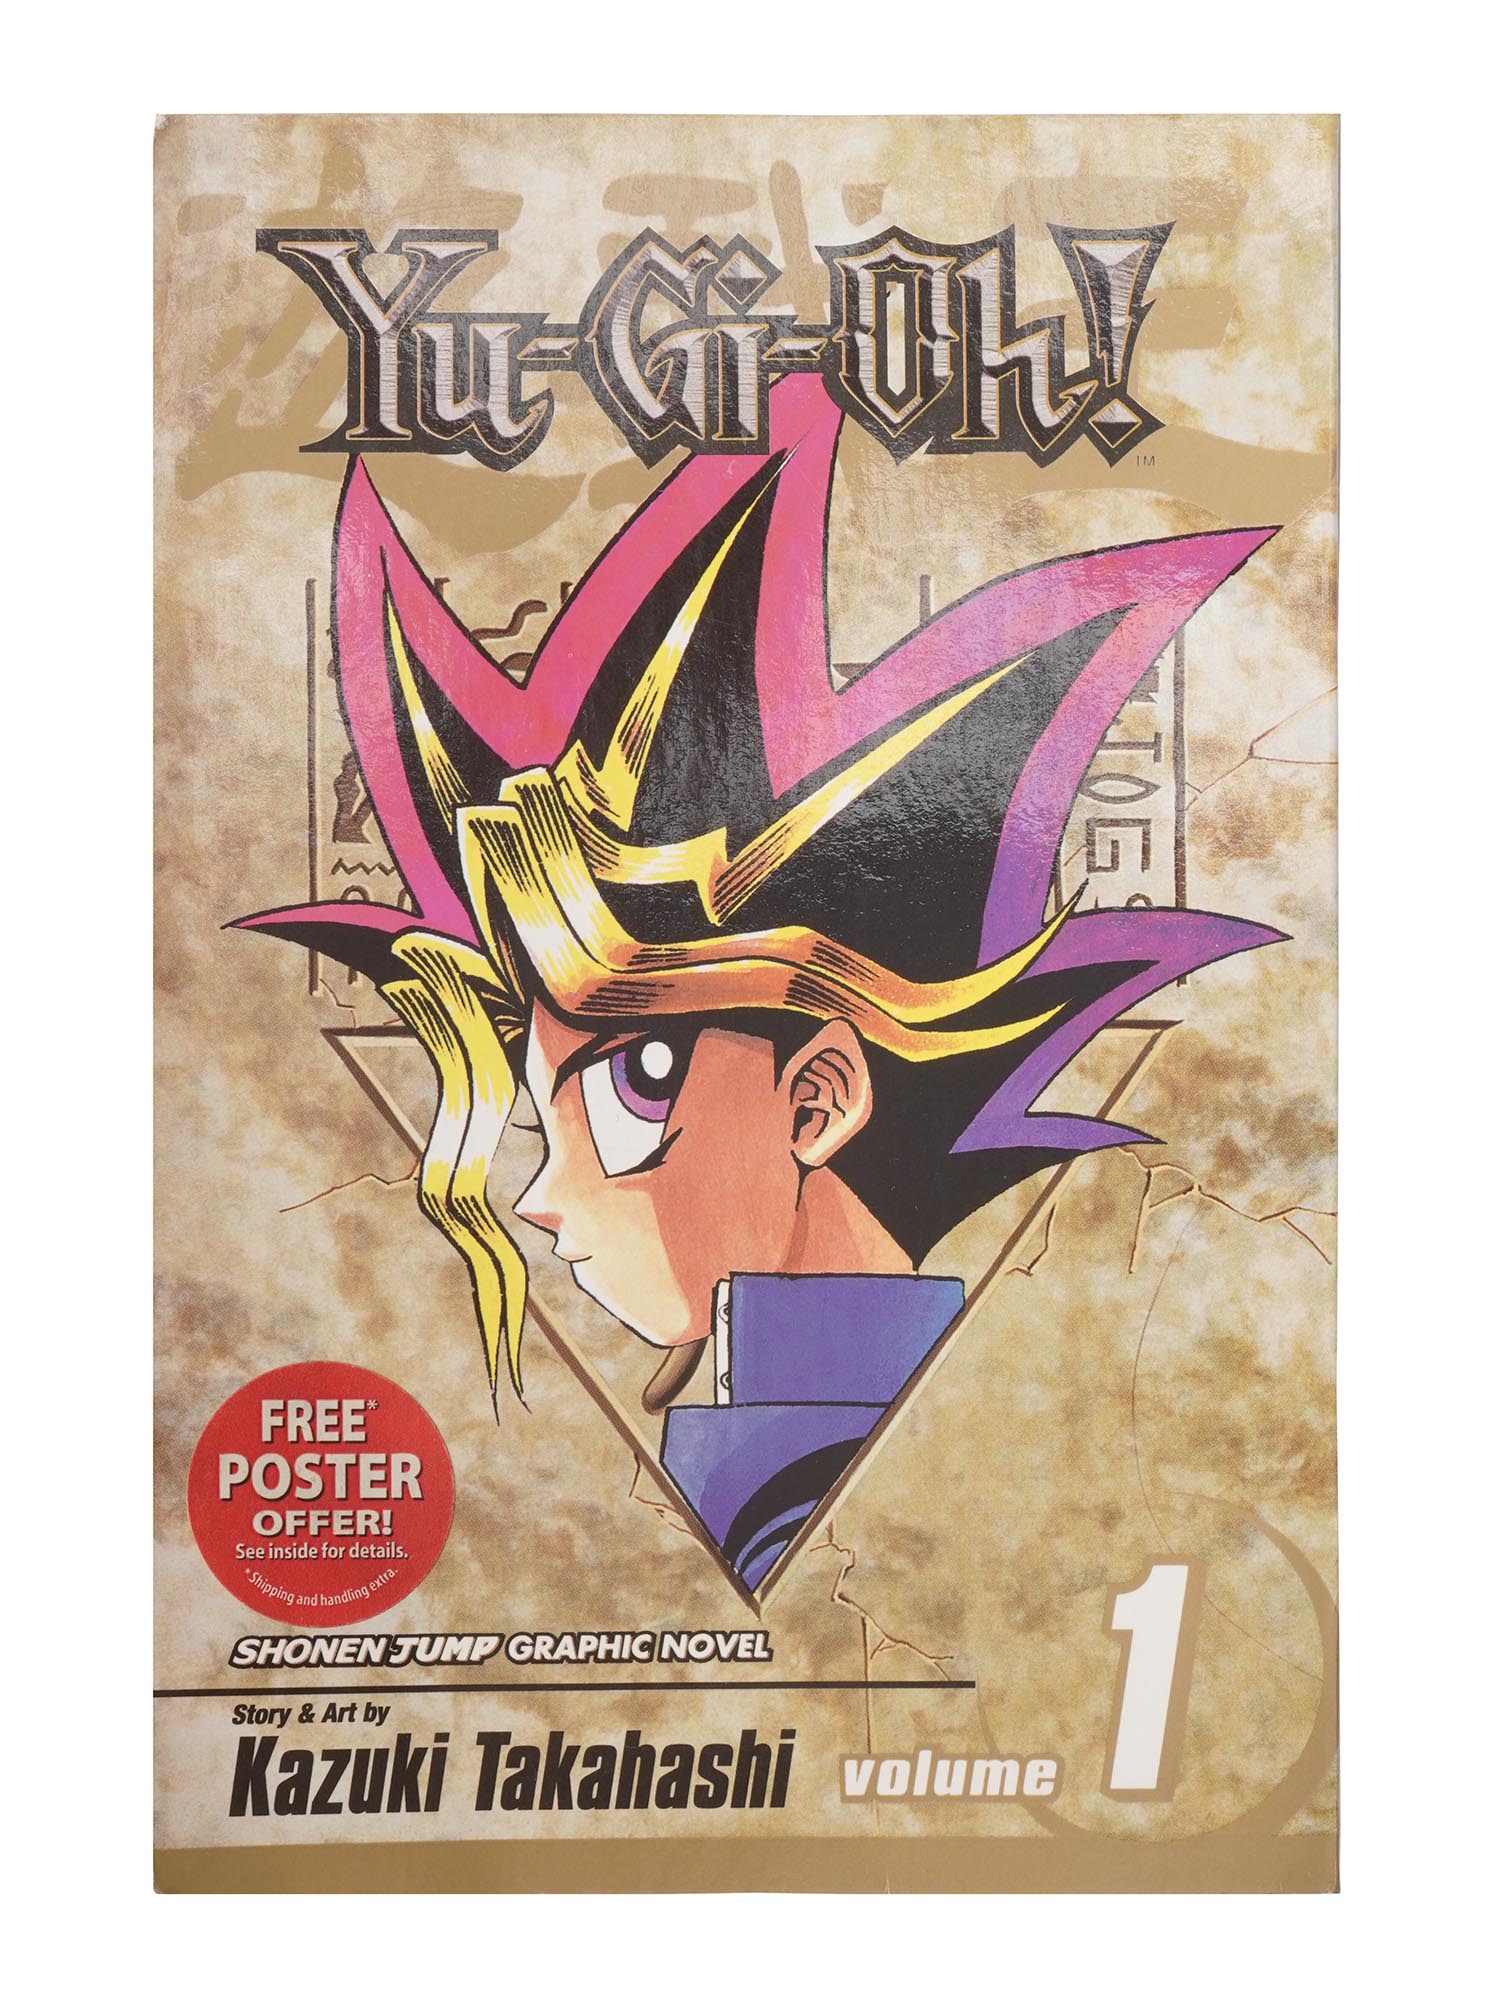 JAPANESE YU GI OH CUT OUT ILLUSTRATION AND COMICS PIC-2